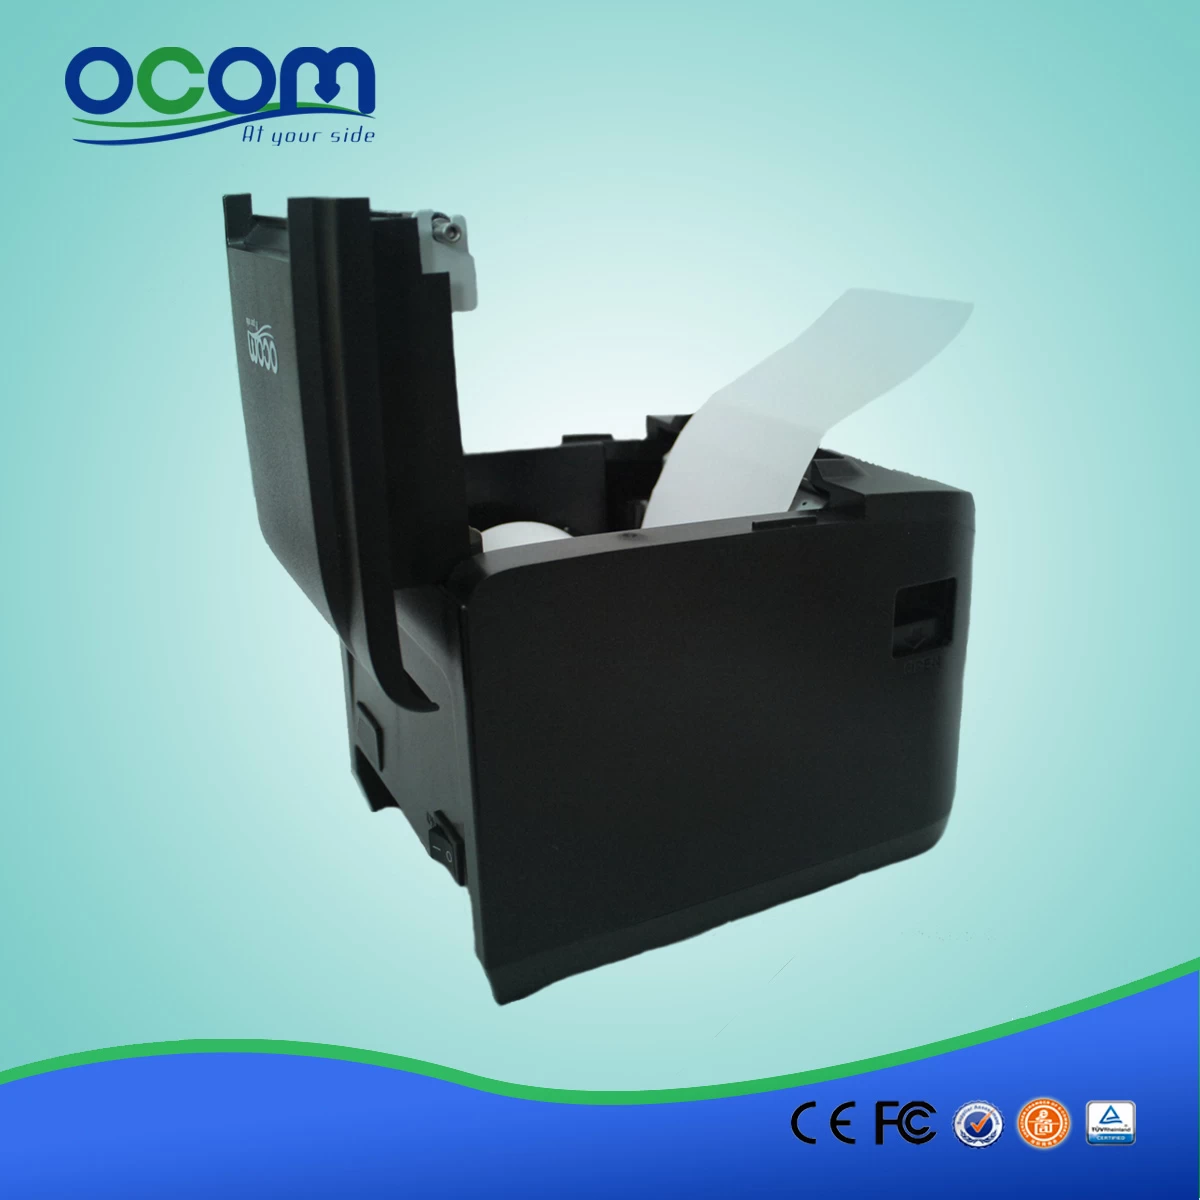 80mm High Speed Thermal Receipt Printer with auto cutter